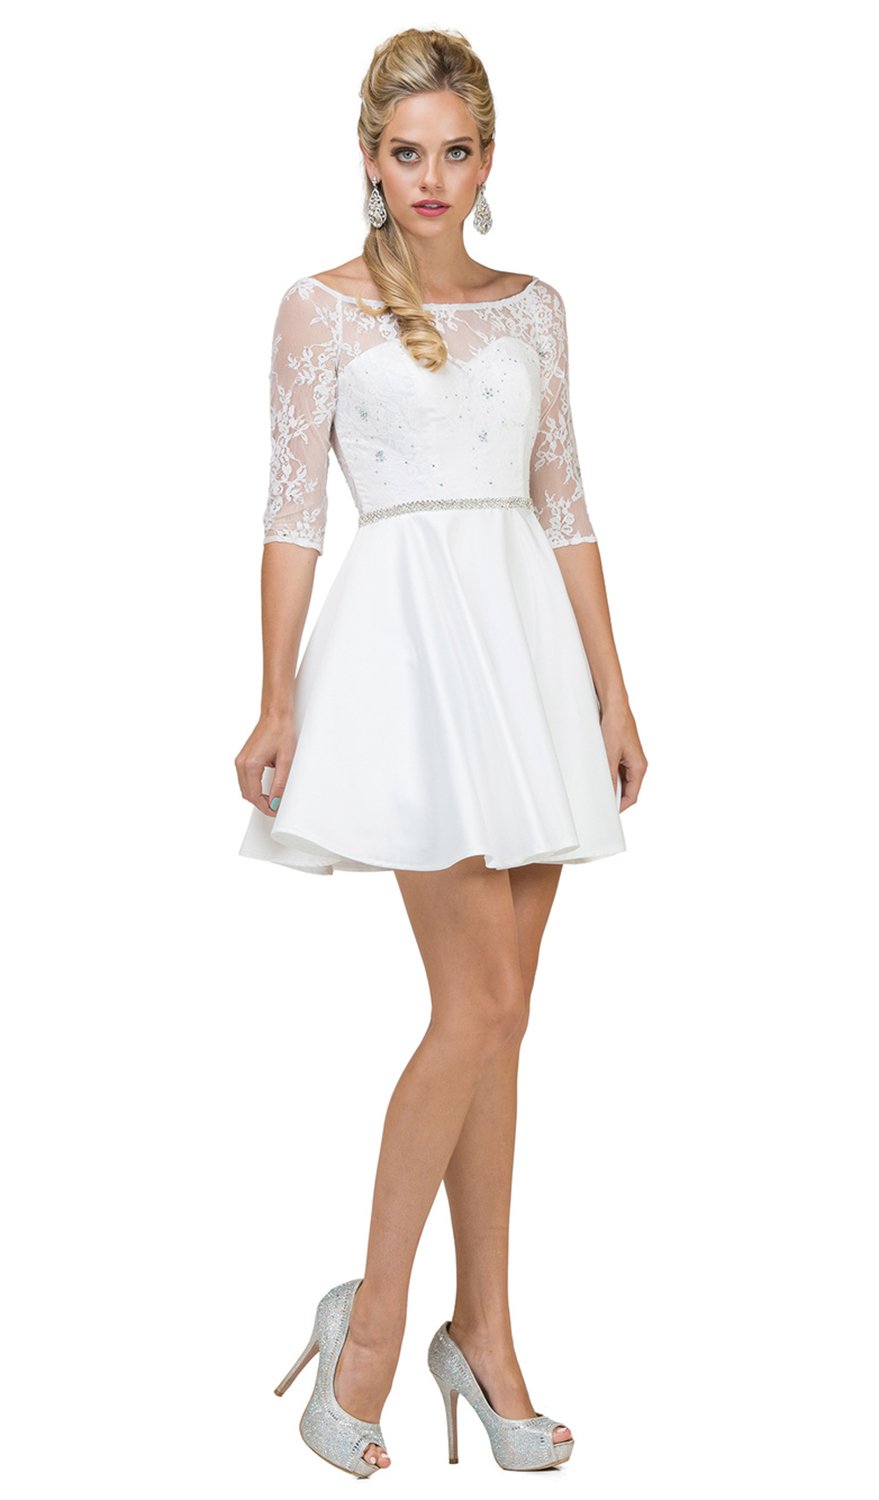 Dancing Queen - 2112 Beaded Sheer Lace Quarter Sleeve Satin Dress In White